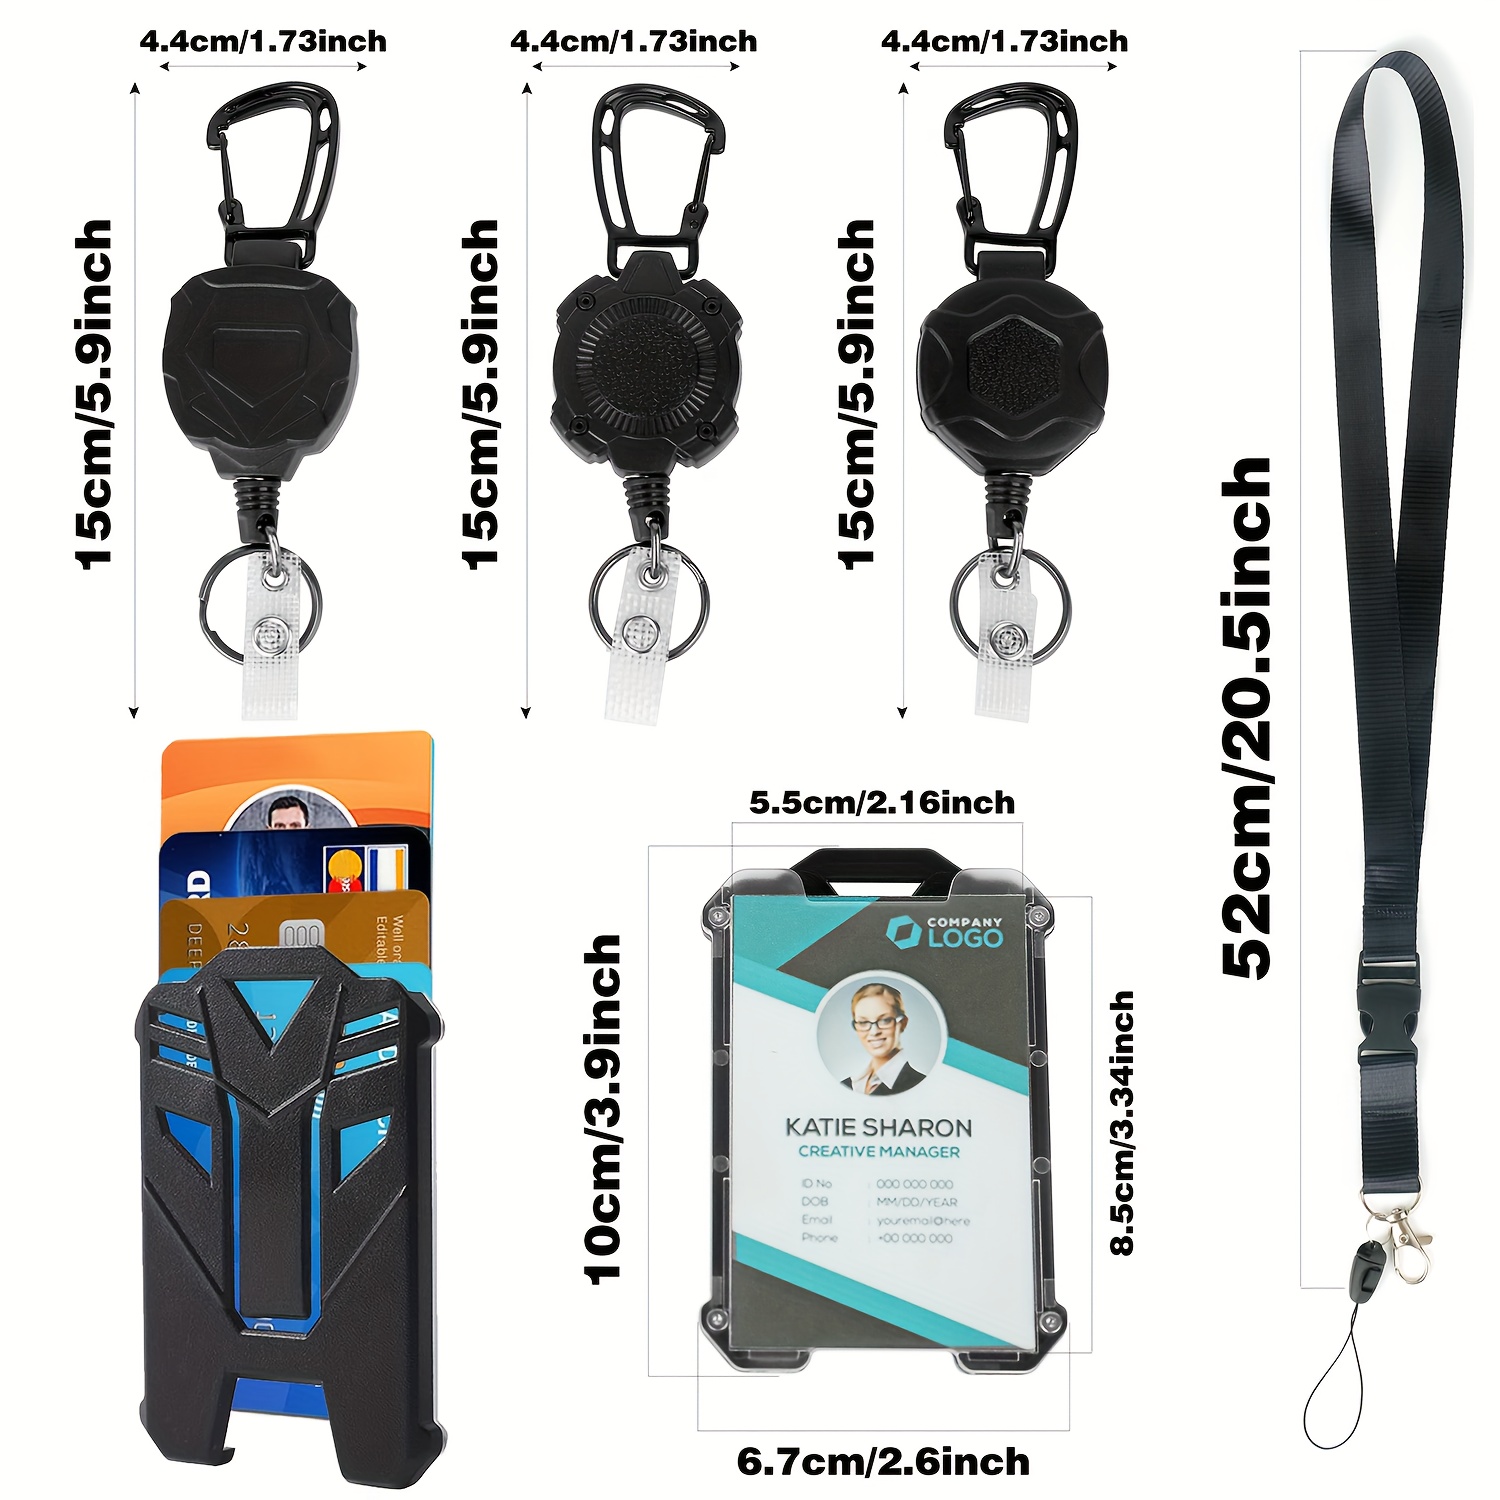 Keychain Retractable Level Measuring Tape - AIGP5564 - IdeaStage  Promotional Products